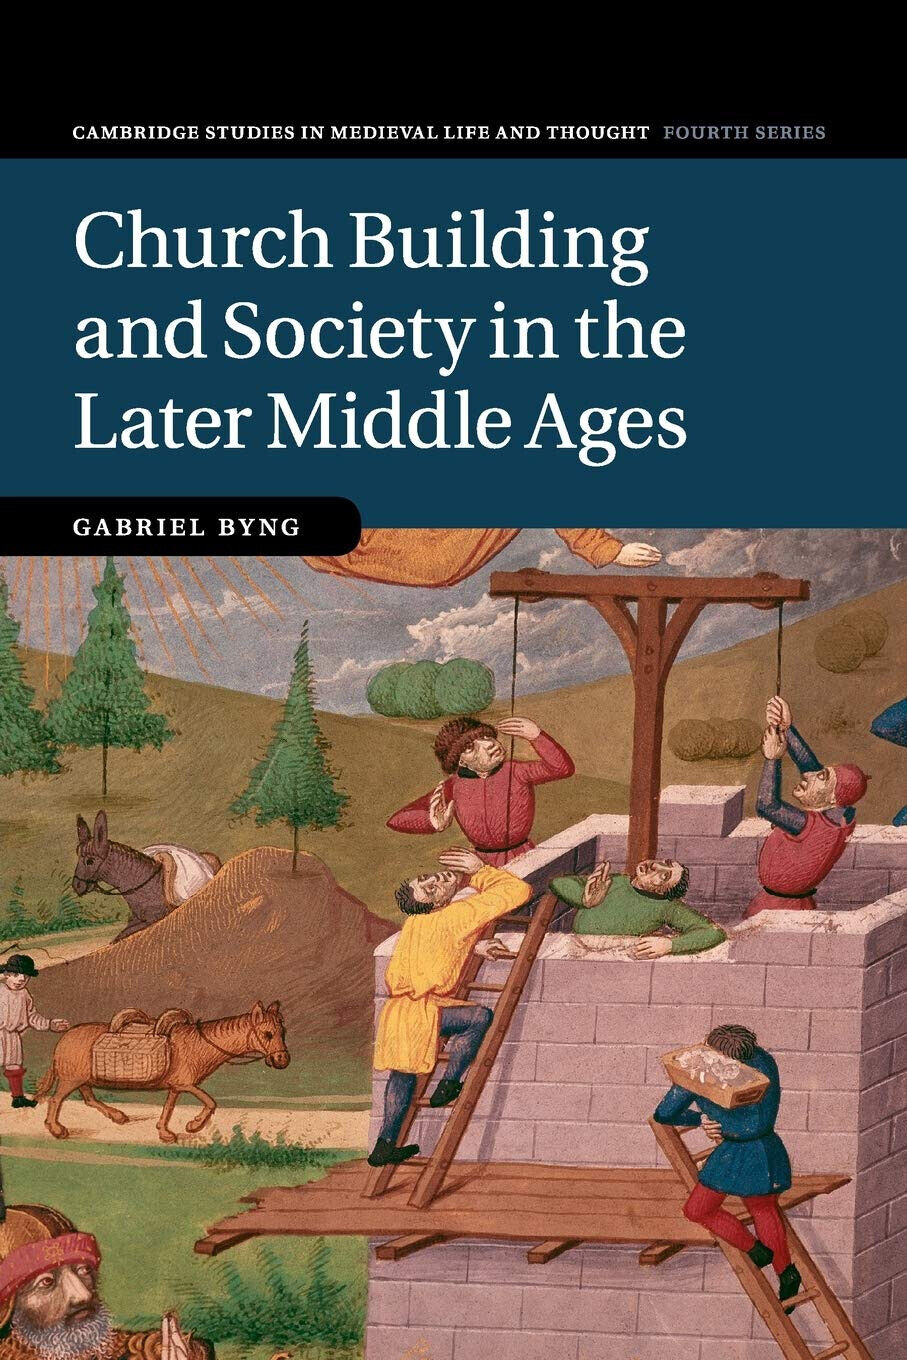 Church Building And Society In The Later Middle Ages - Gabriel Byng - 2020